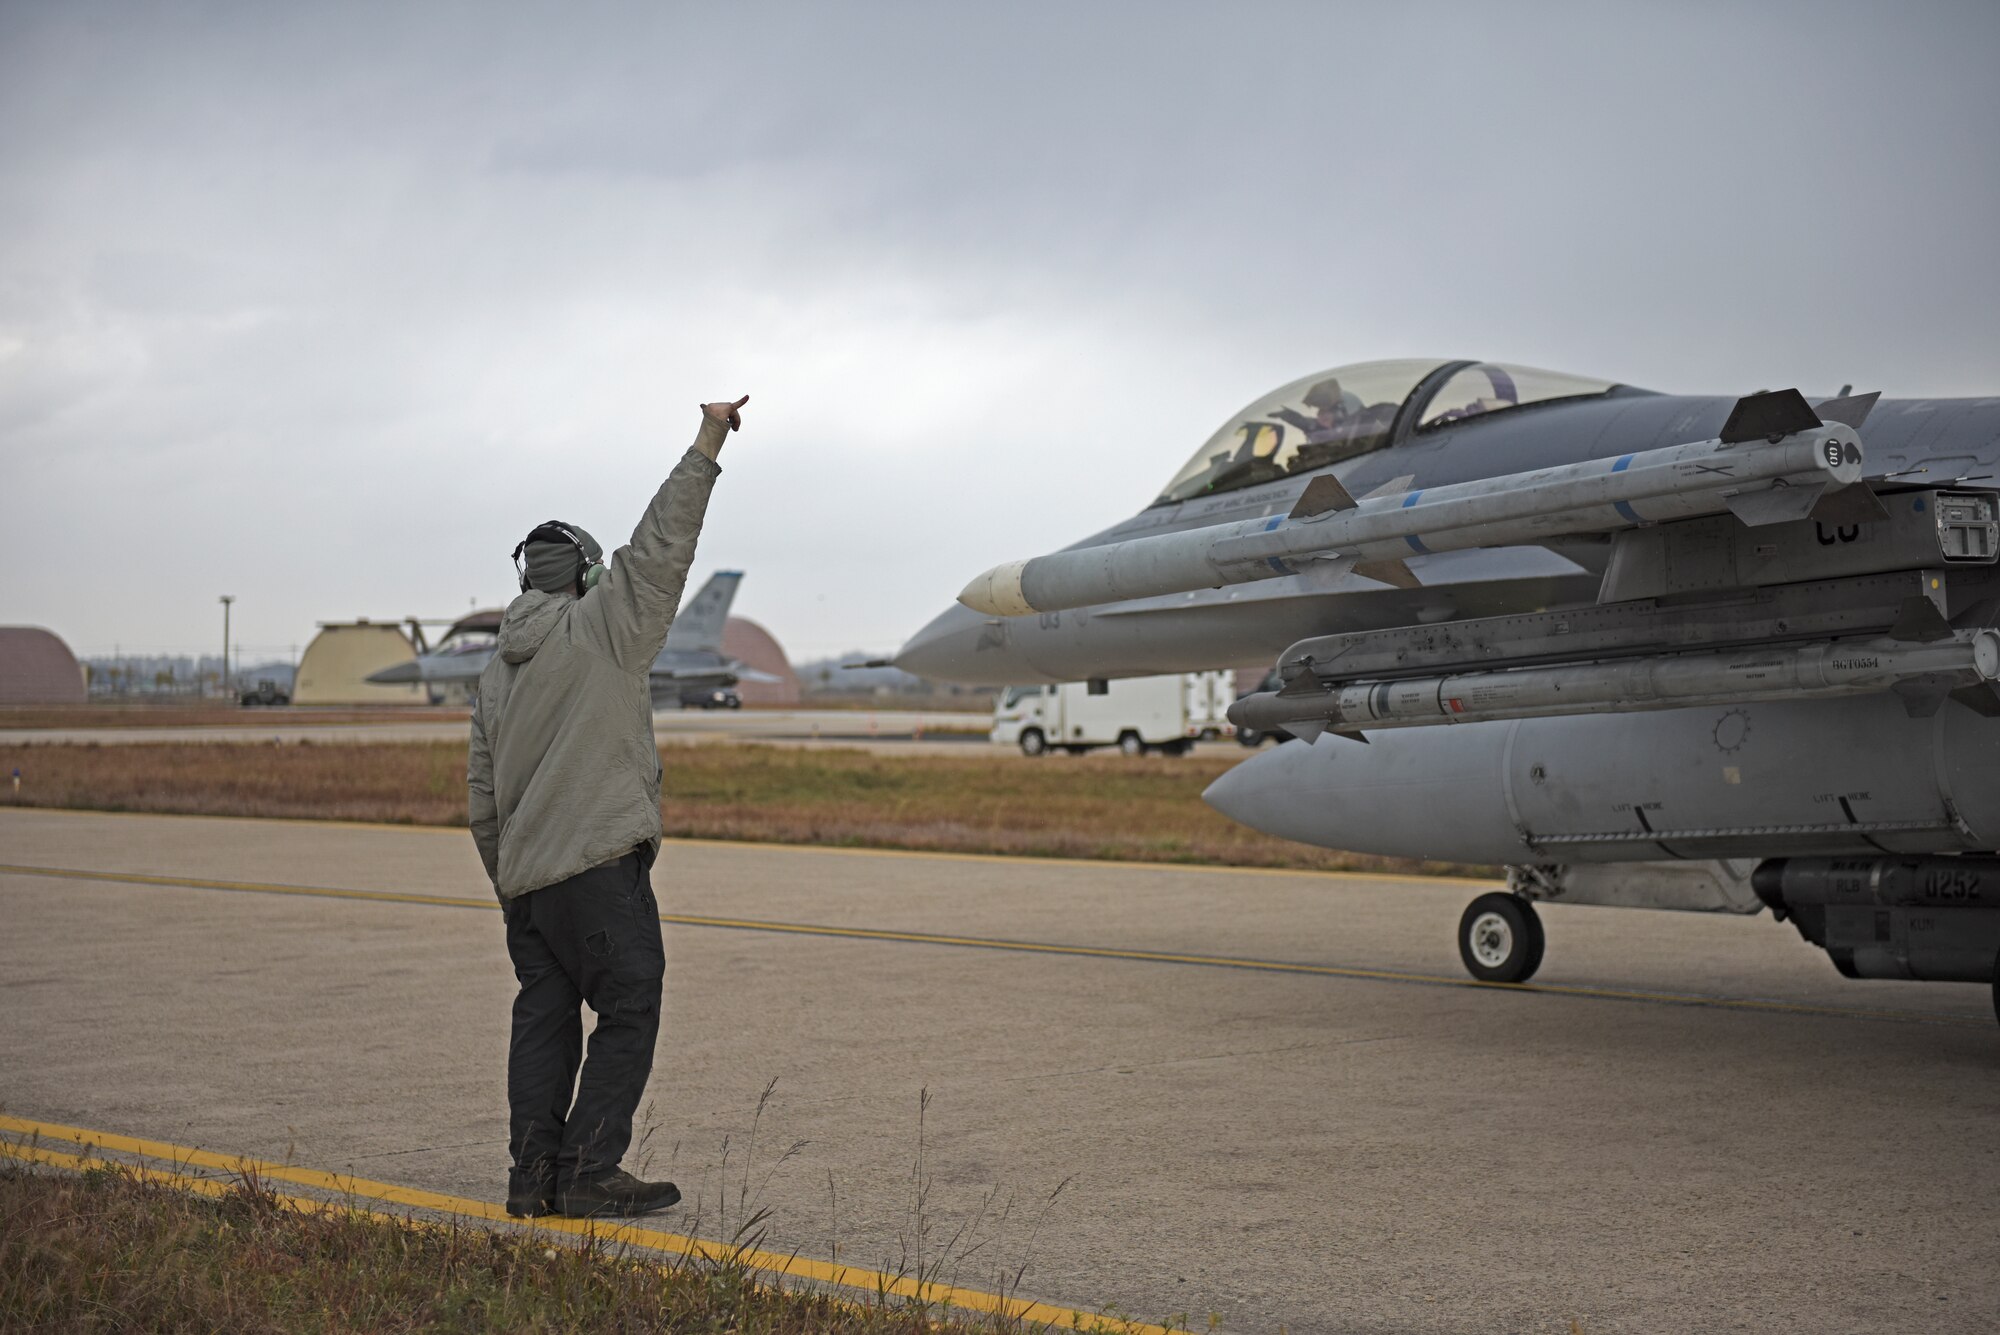 A U.S. Air Force maintainer assigned to the 35th Aircraft Maintenance Unit conducts a pre-flight inspection at Kunsan Air Base, Republic of Korea, Nov. 19, 2019. The 8th Maintenance Group is responsible for daily flying and maintenance operations, intermediate level aircraft maintenance, component repair and maintenance training for the wing's assigned aircraft. (U.S. Air Force photo by Staff Sgt. Mackenzie Mendez)